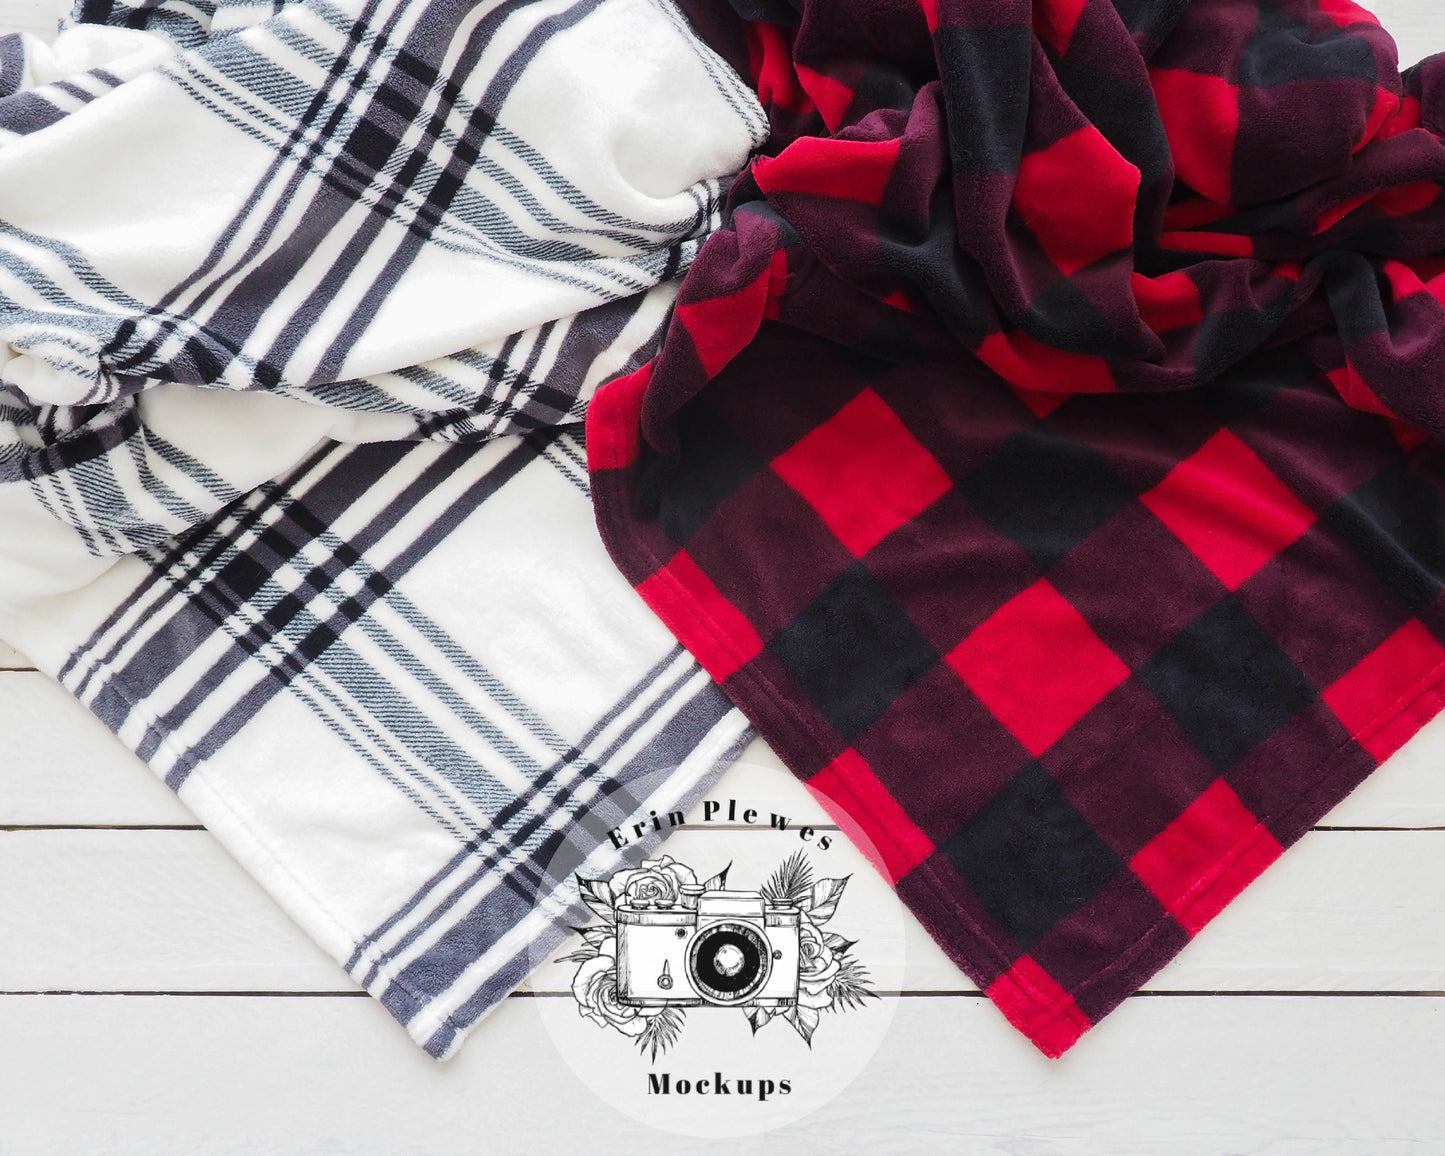 Plaid Blanket Mockup, Red and White Plaid Blanket Mock up, 2 Fleece Blanket Mock Up, Lifestyle Stock Photo, Instant Download Jpeg